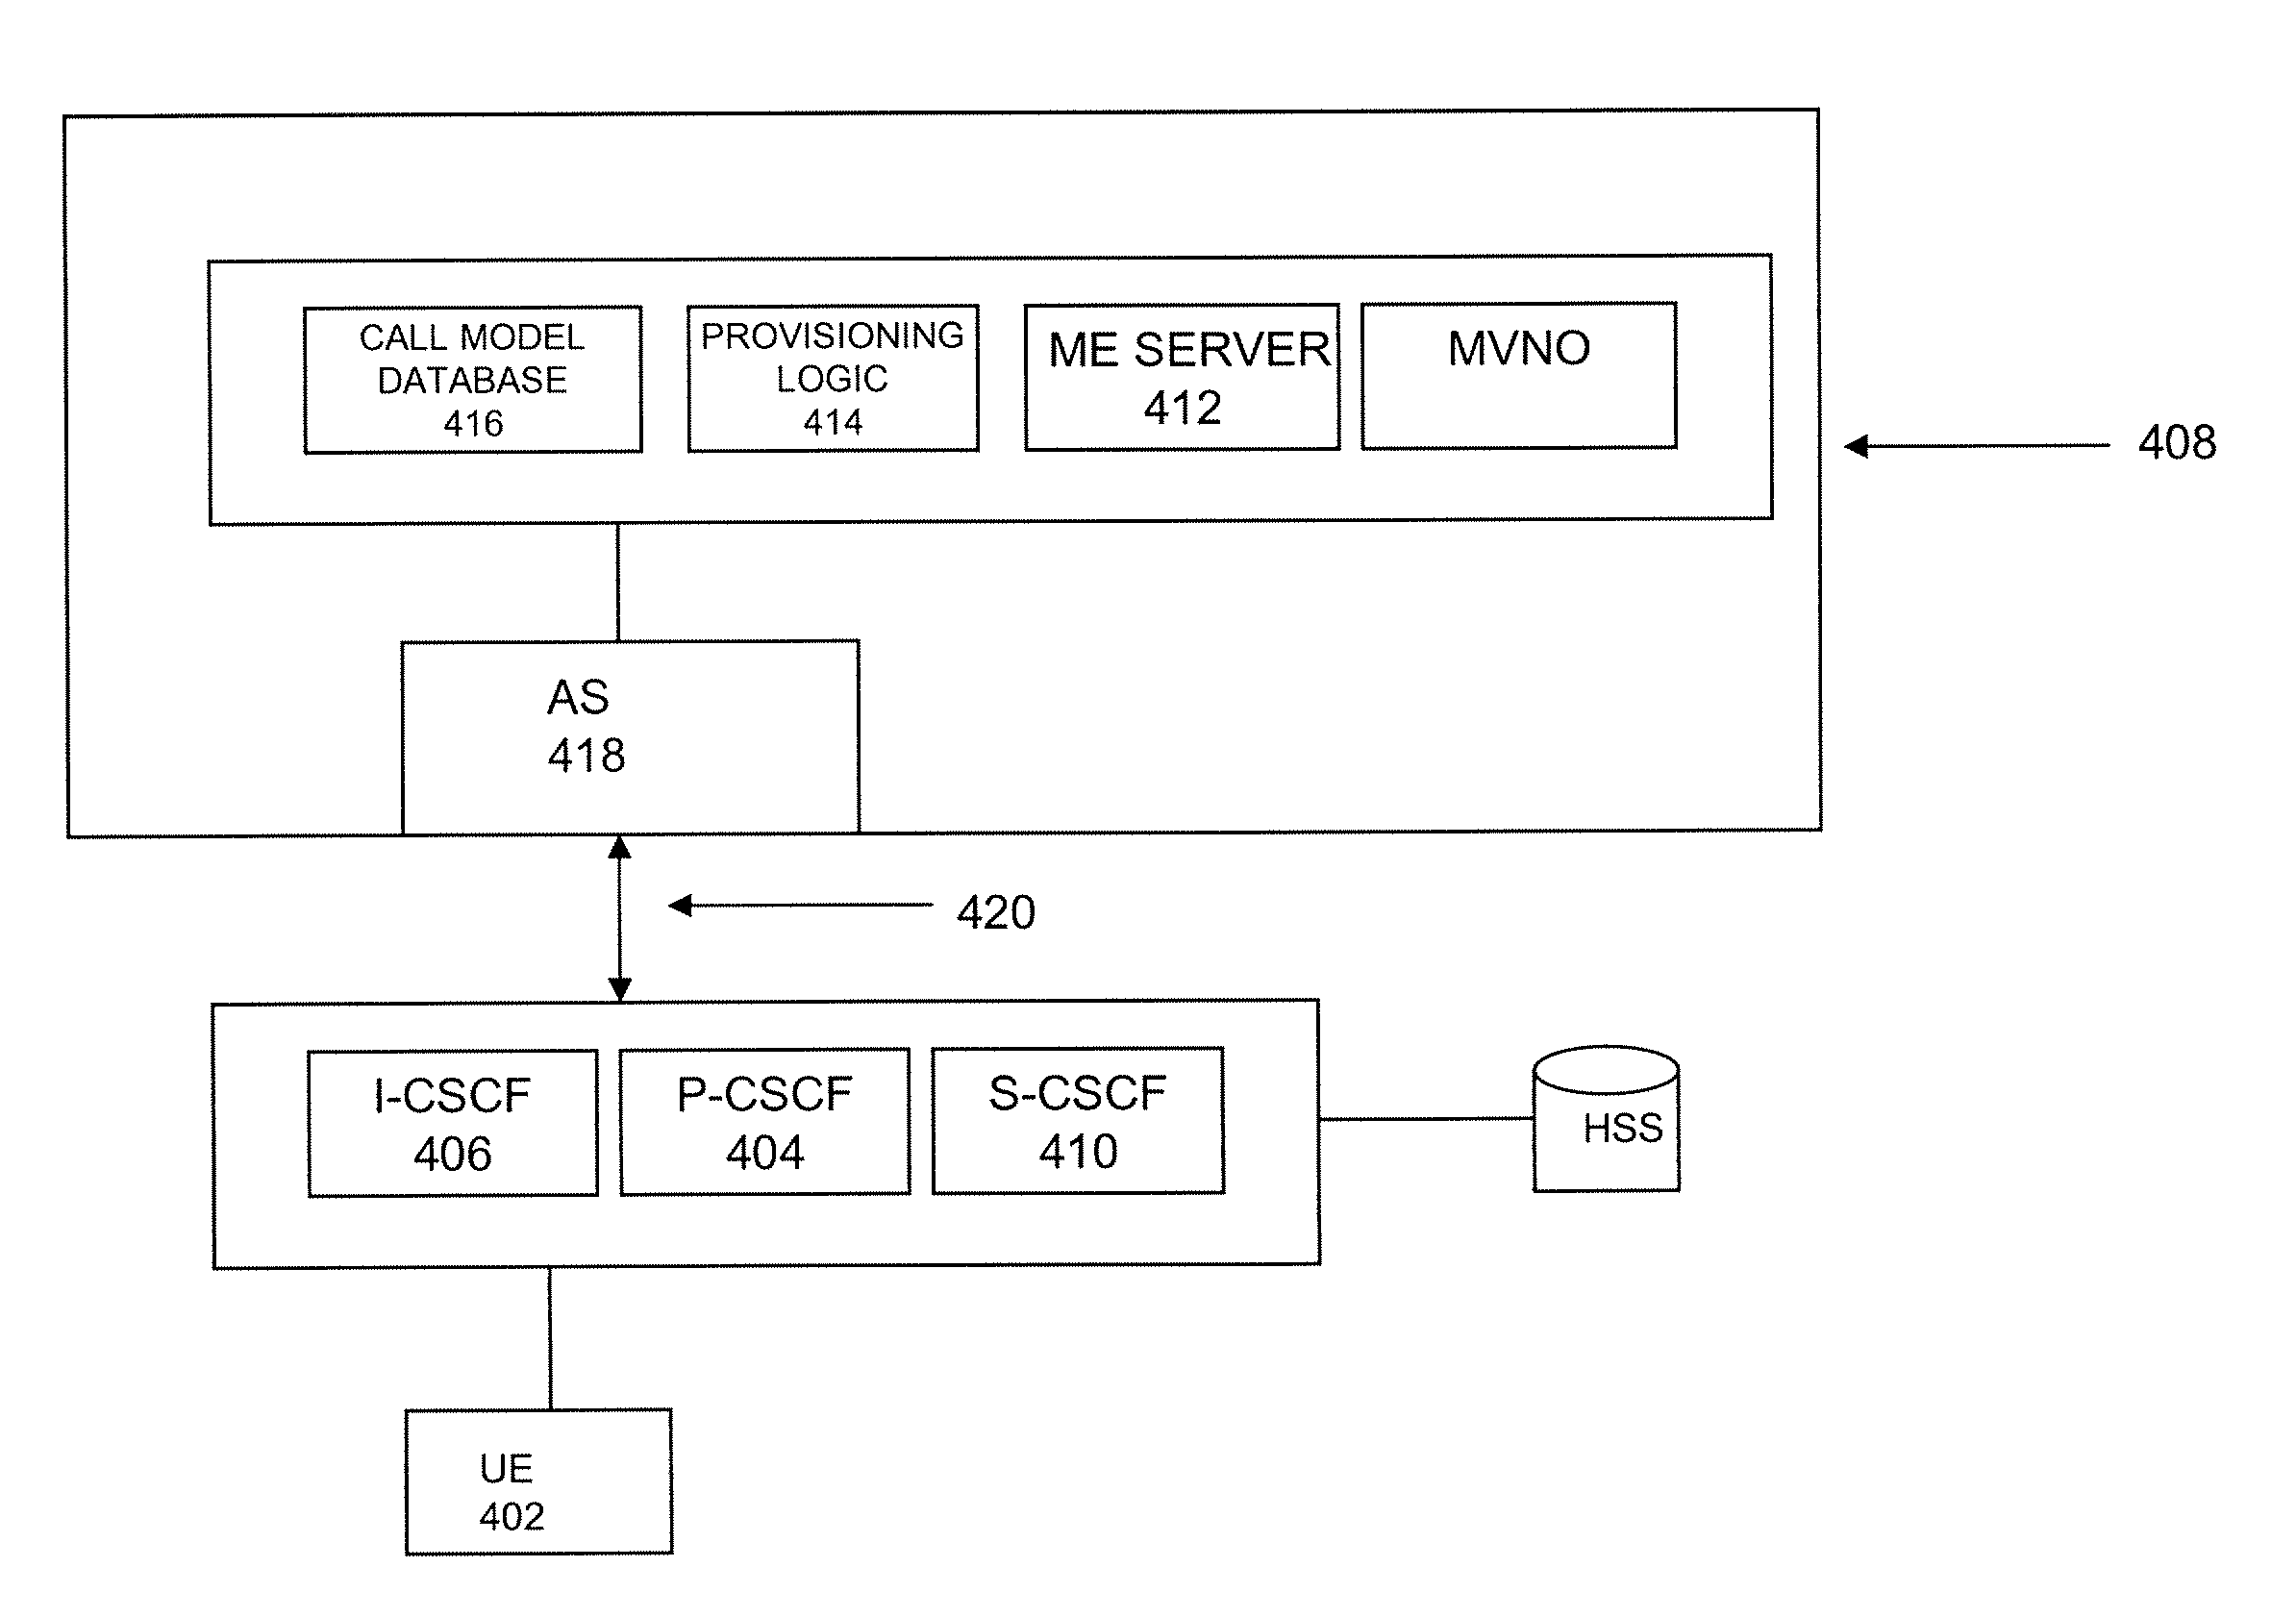 Method of avoiding or minimizing cost of stateful connections between application servers and S-CSCF nodes in an IMS network with multiple domains